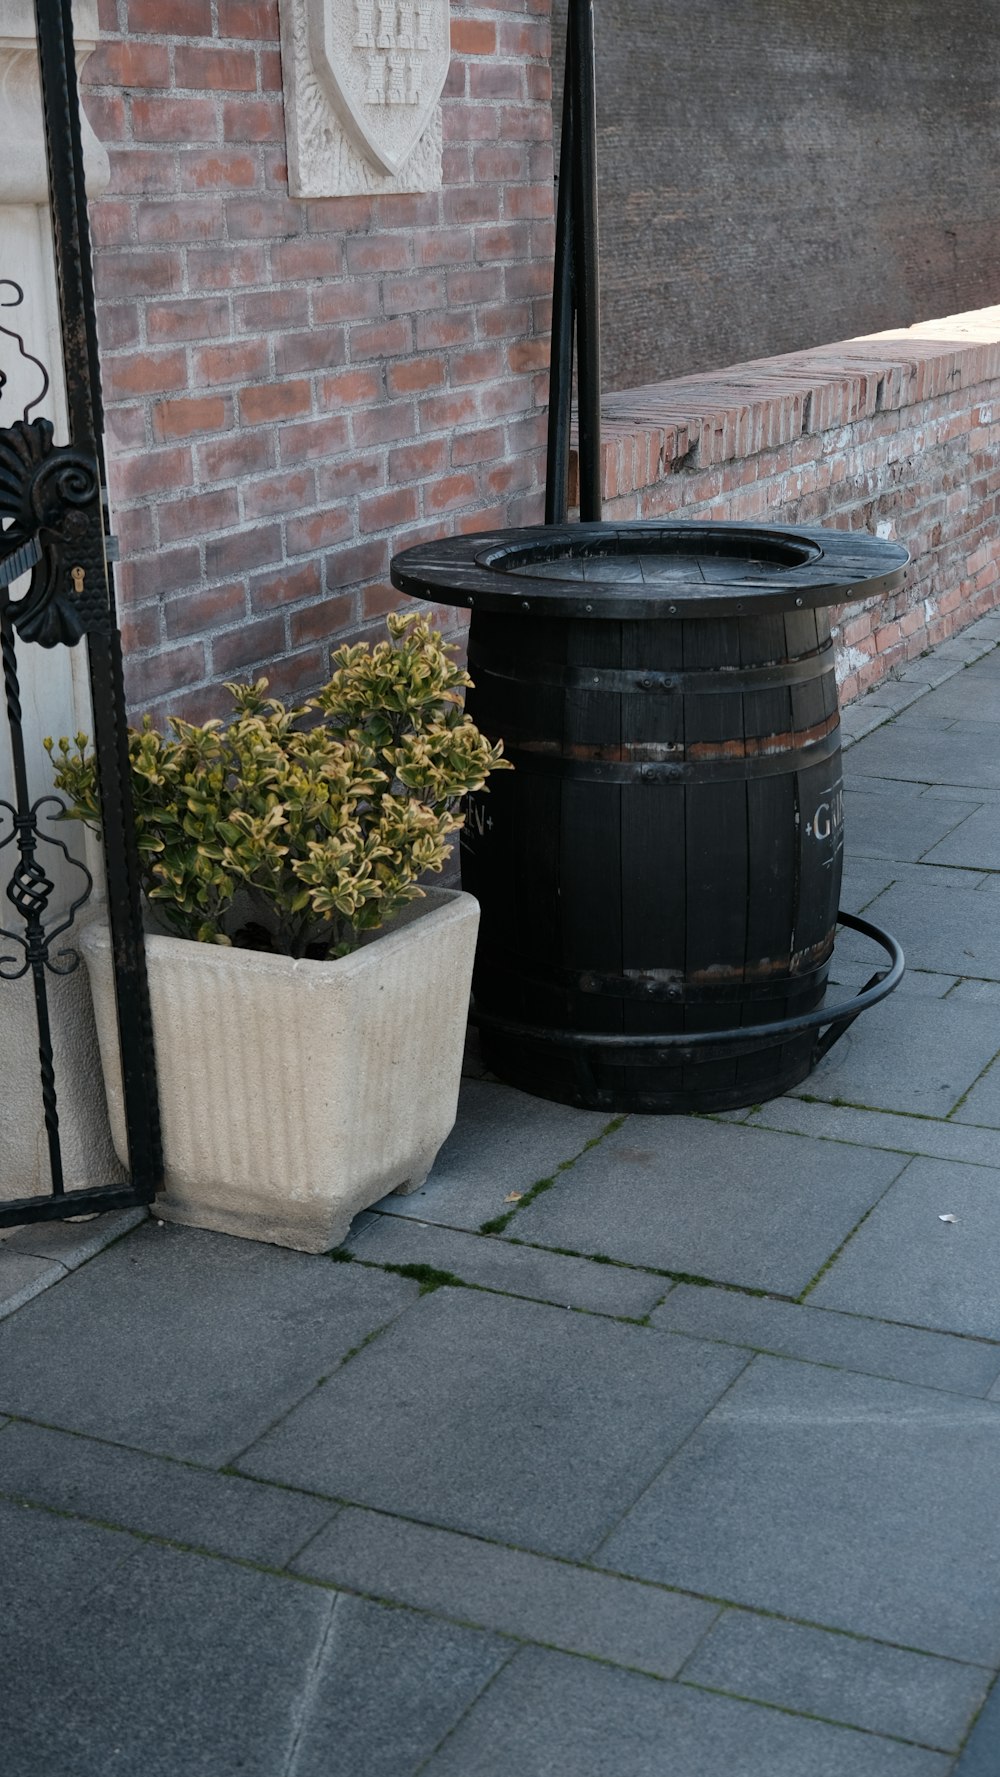 a potted plant next to a barrel on a sidewalk